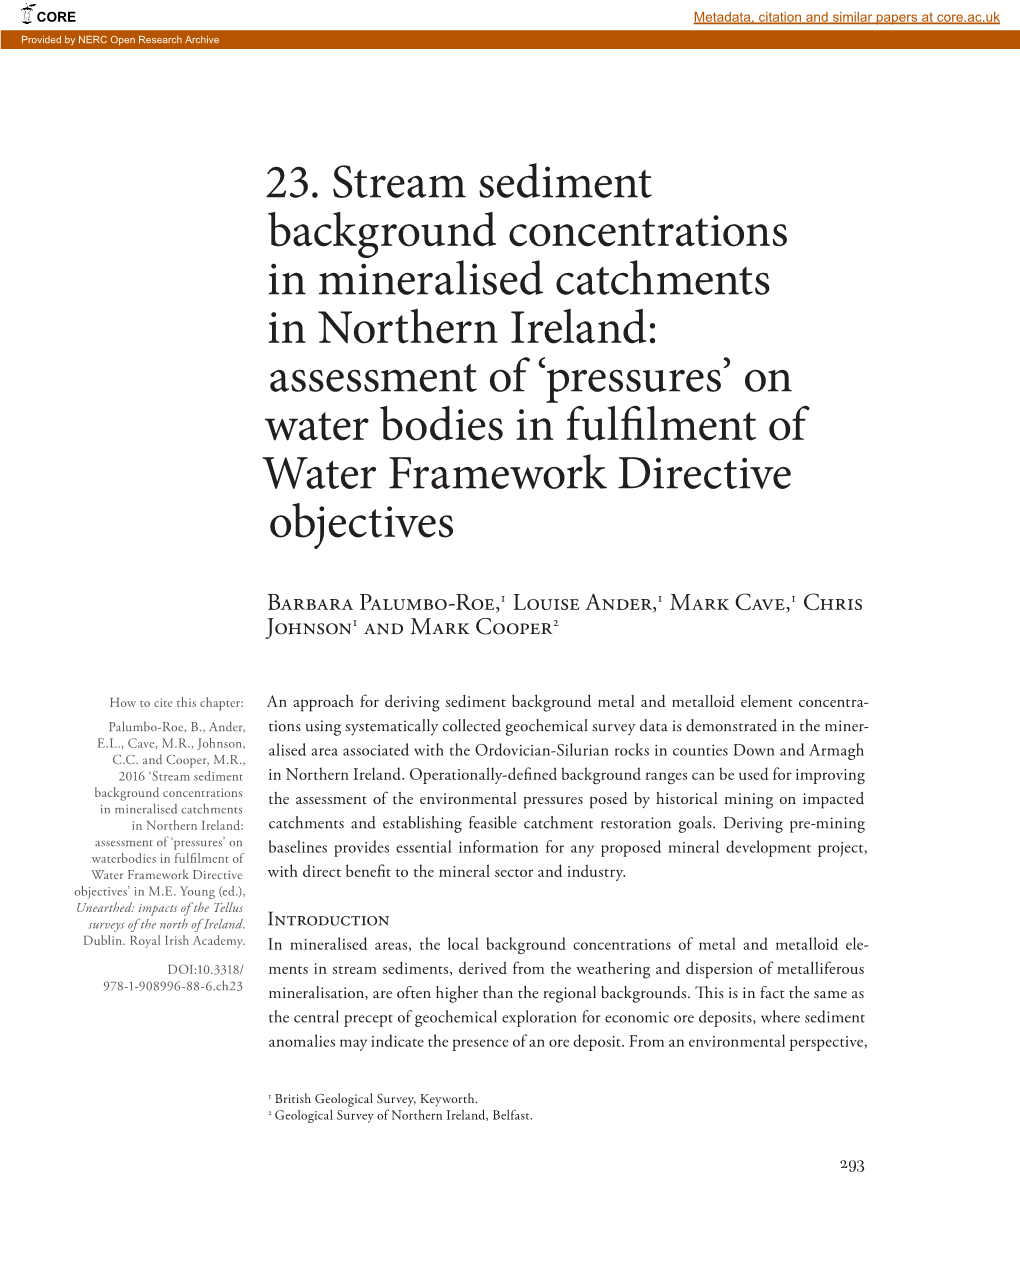 23. Stream Sediment Background Concentrations in Mineralised